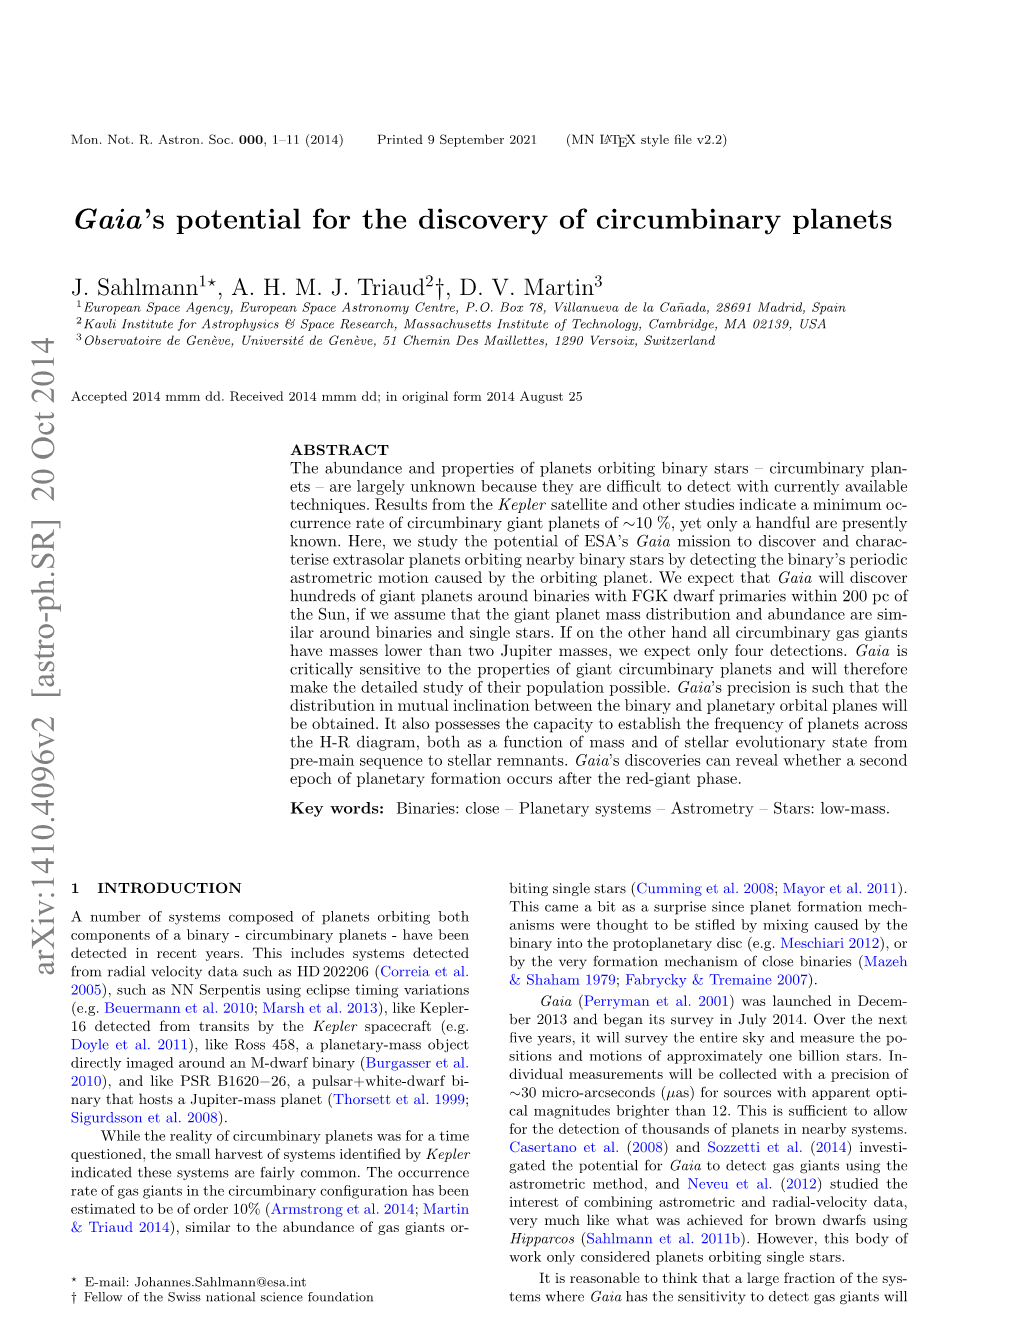 Gaia's Potential for the Discovery of Circumbinary Planets